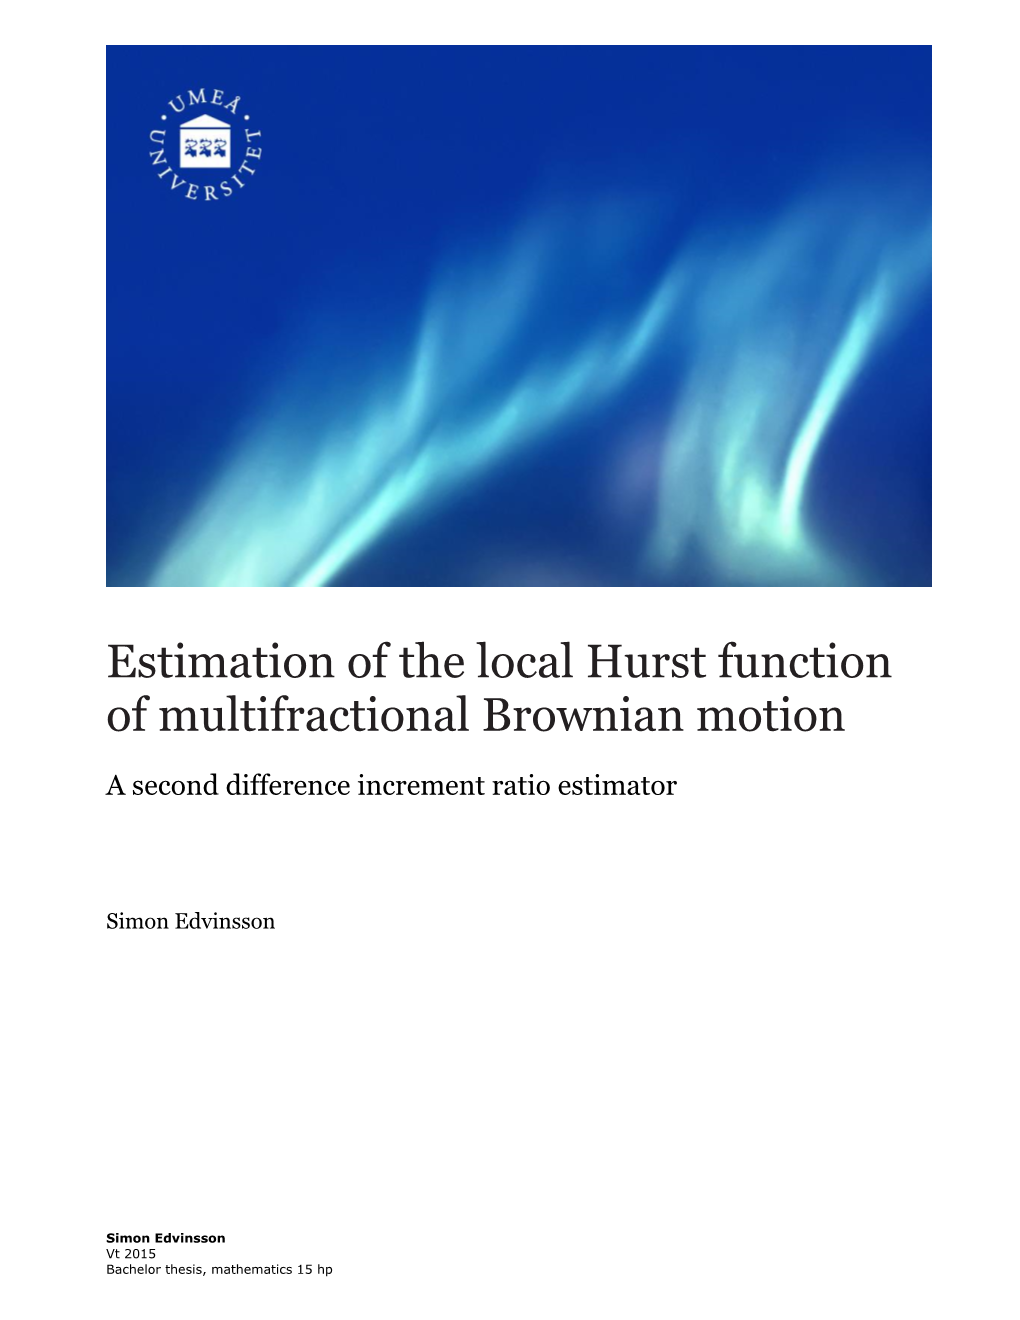 Estimation of the Local Hurst Function of Multifractional Brownian Motion